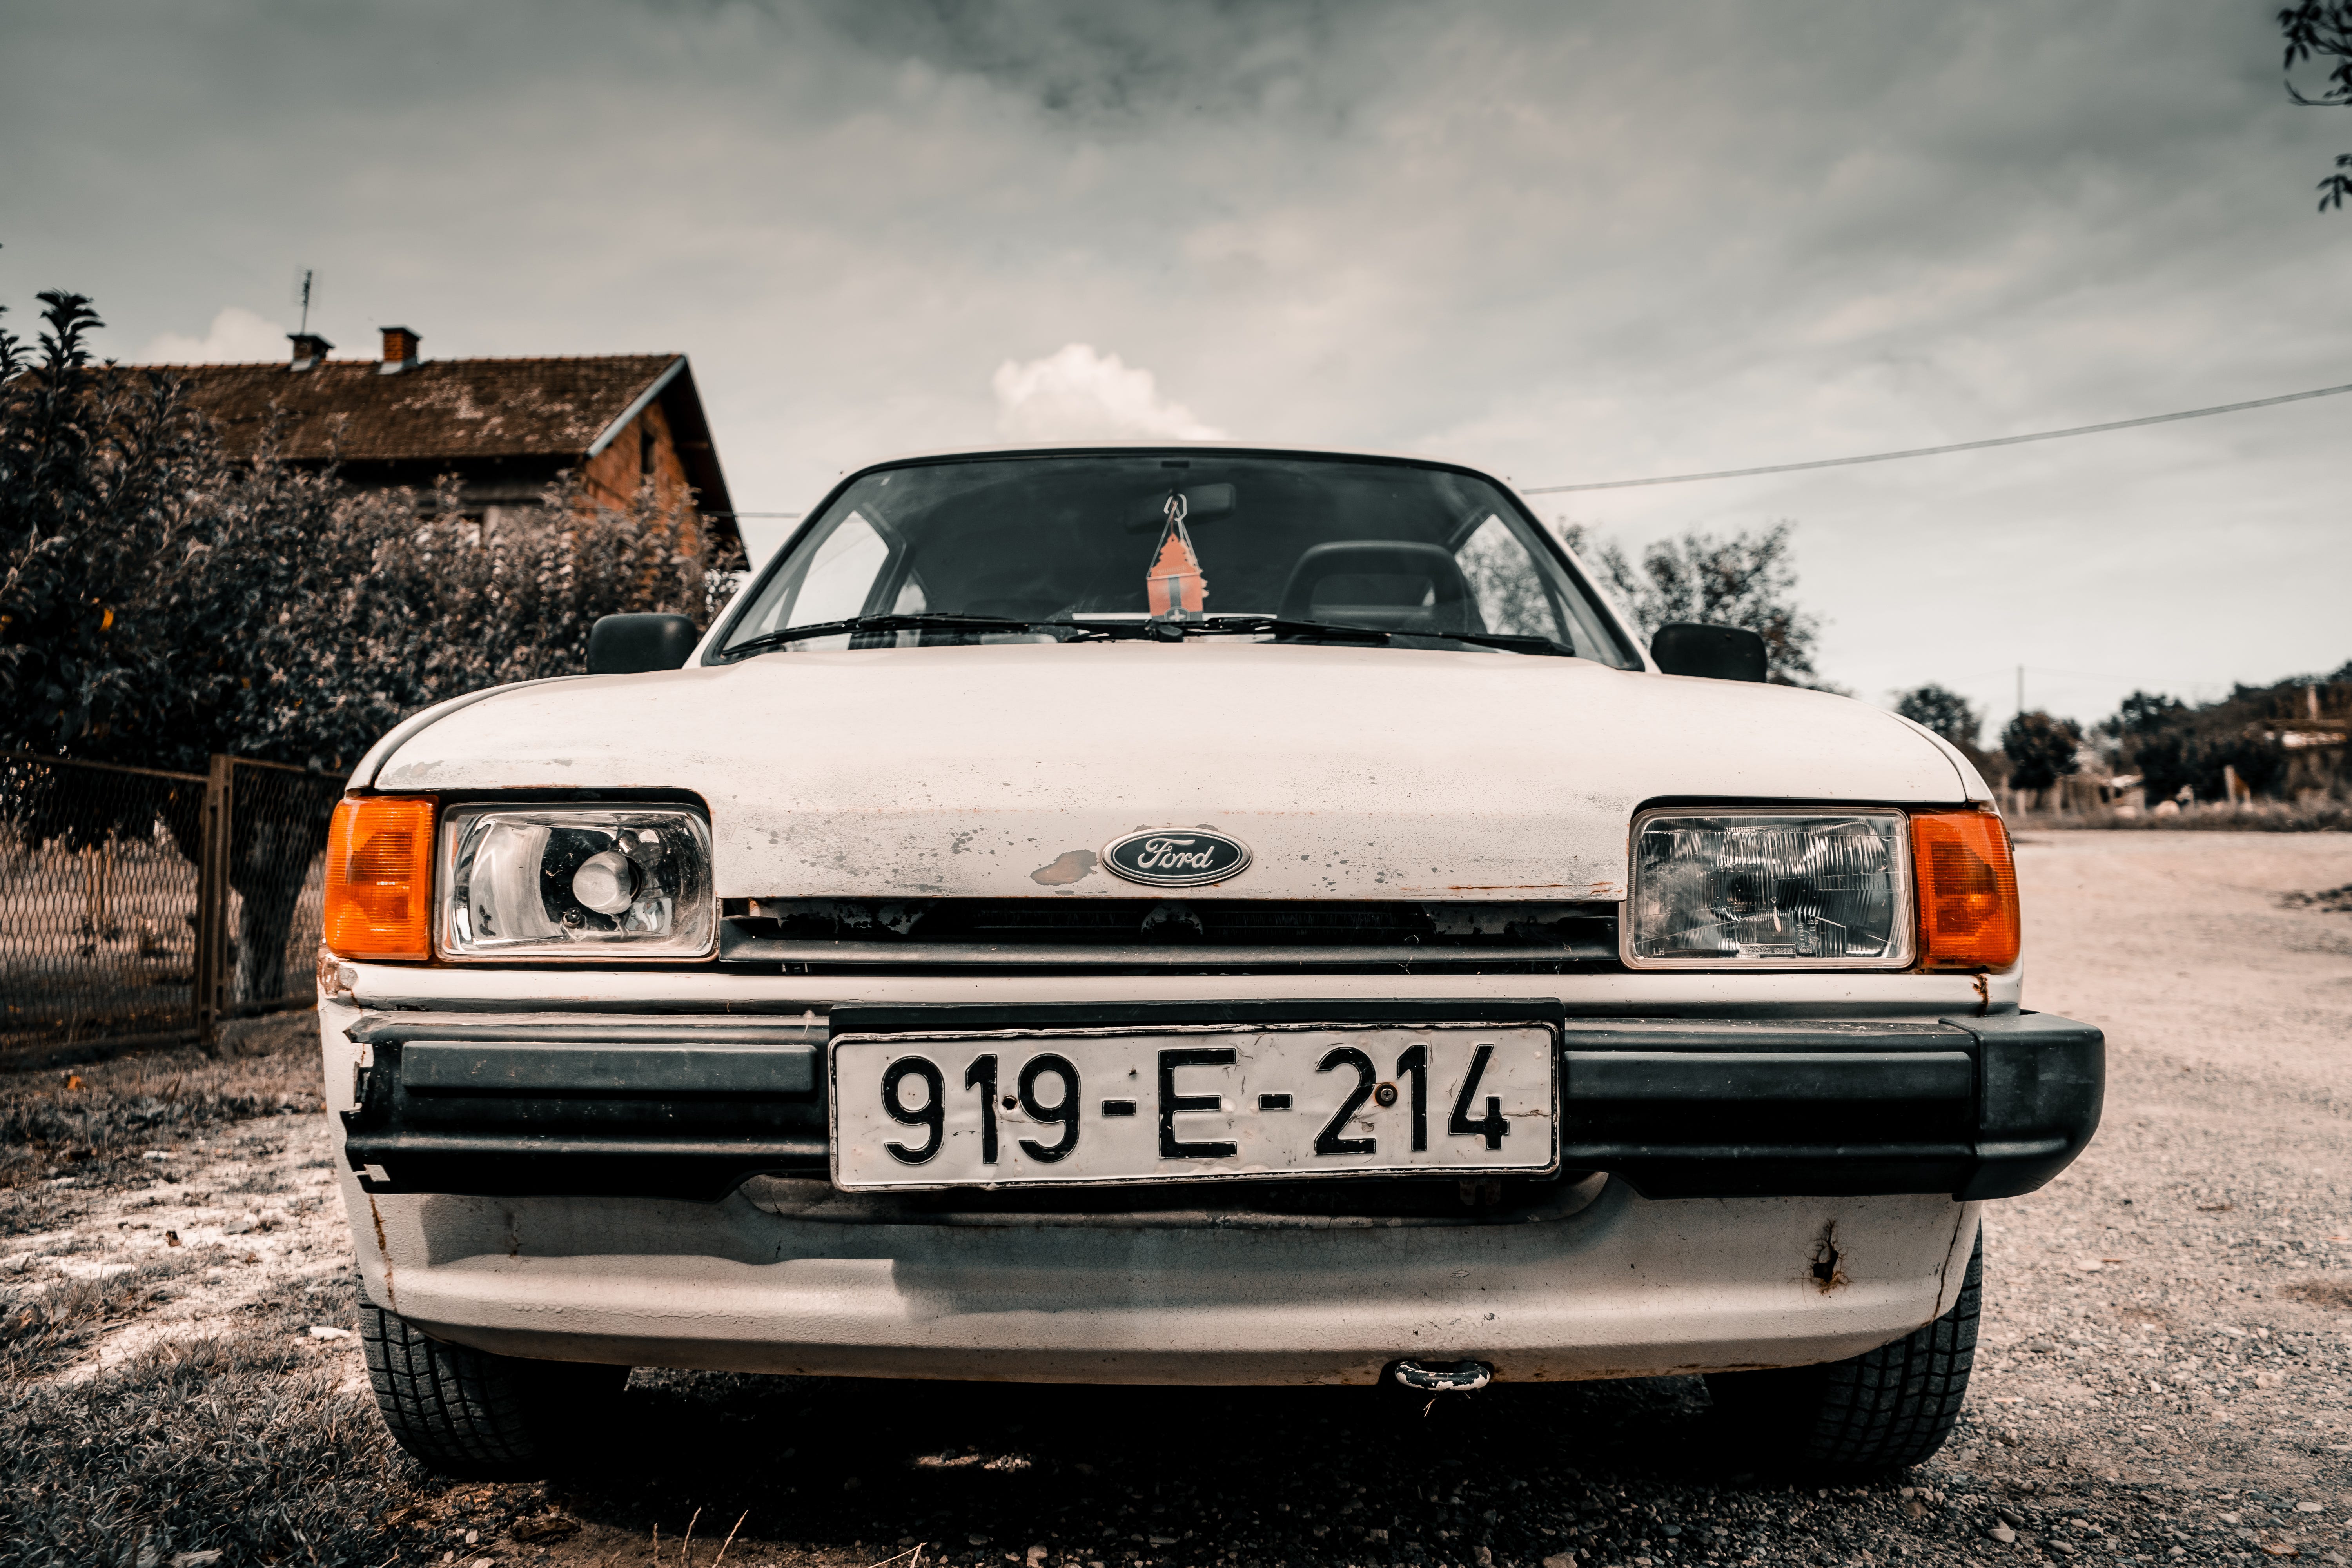 My Impatience Drove Me Face First Into An Old Ford By Doc Jay Md The Haven Medium